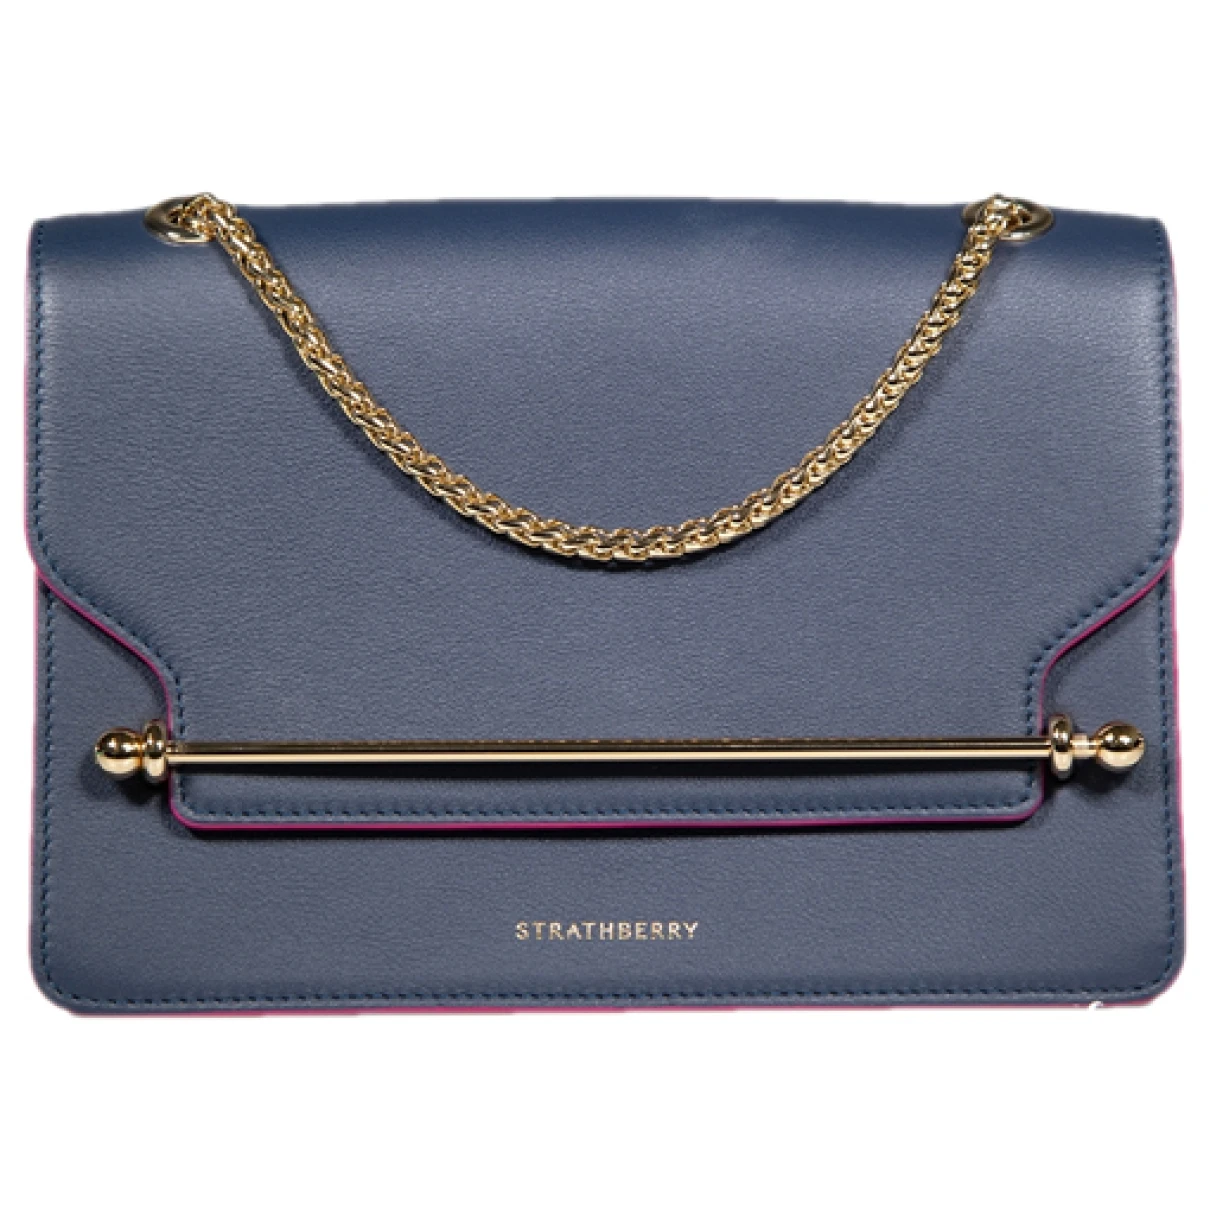 Pre-owned Strathberry Leather Handbag In Navy